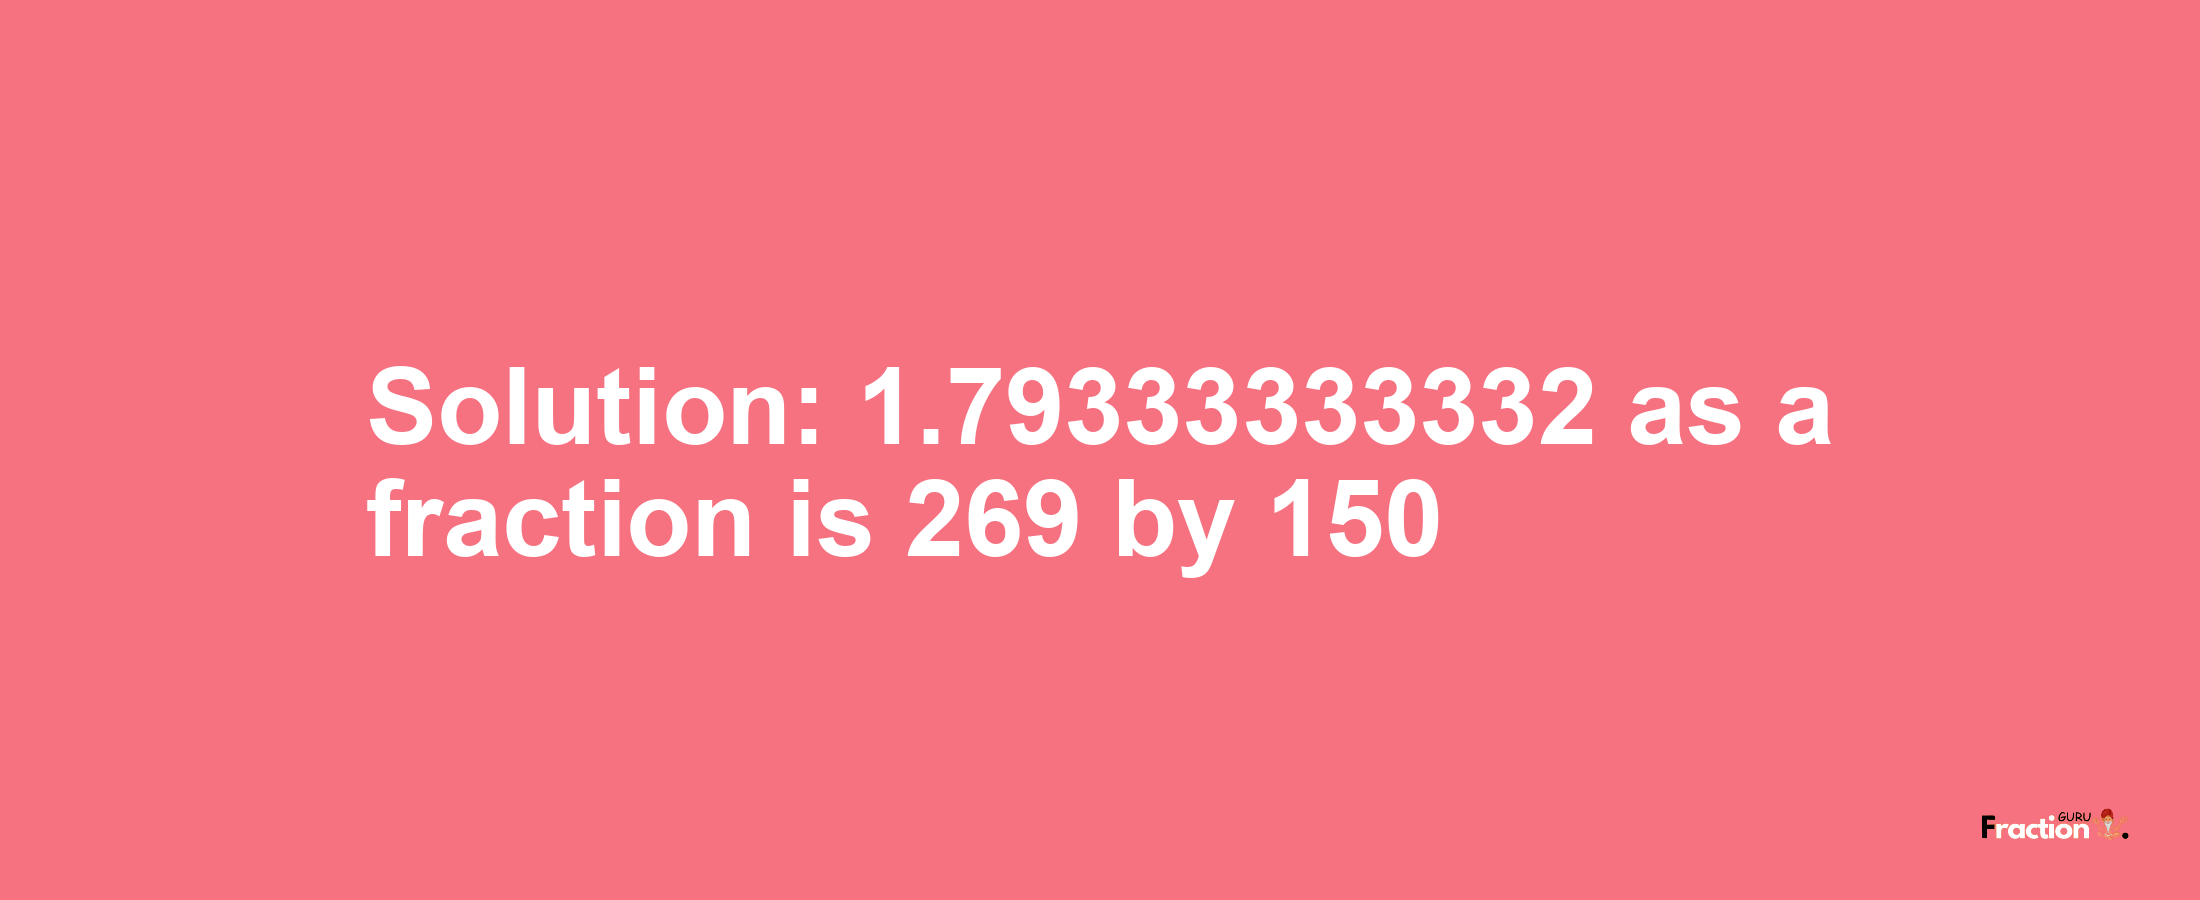 Solution:1.79333333332 as a fraction is 269/150